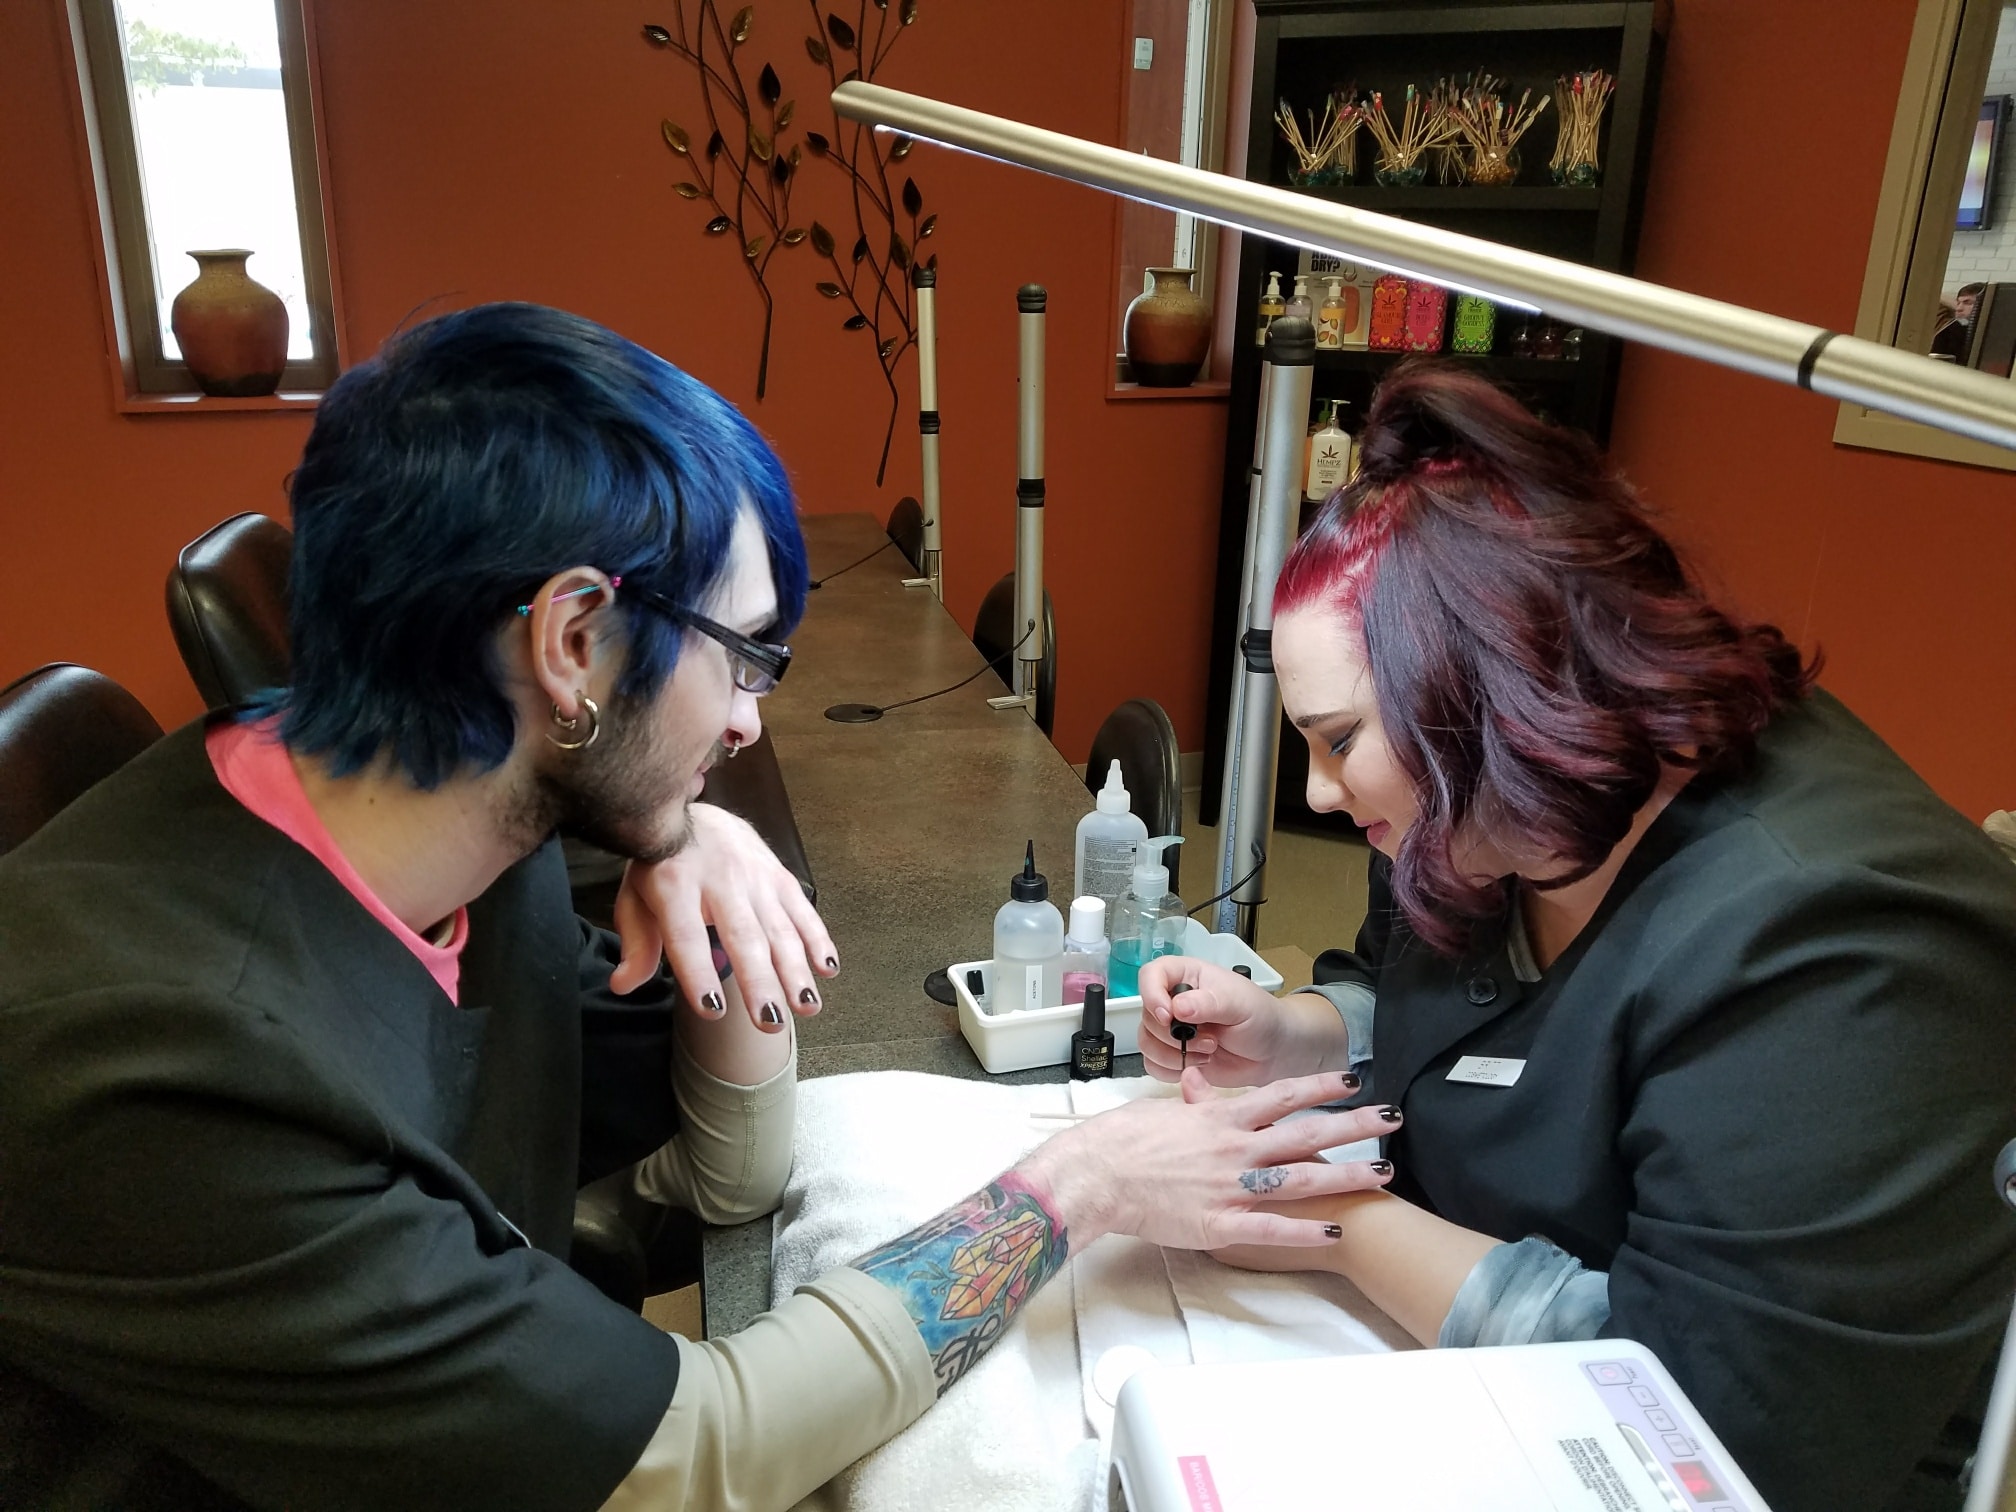 Cosmo student Britt giving Cosmo student Lex a manicure